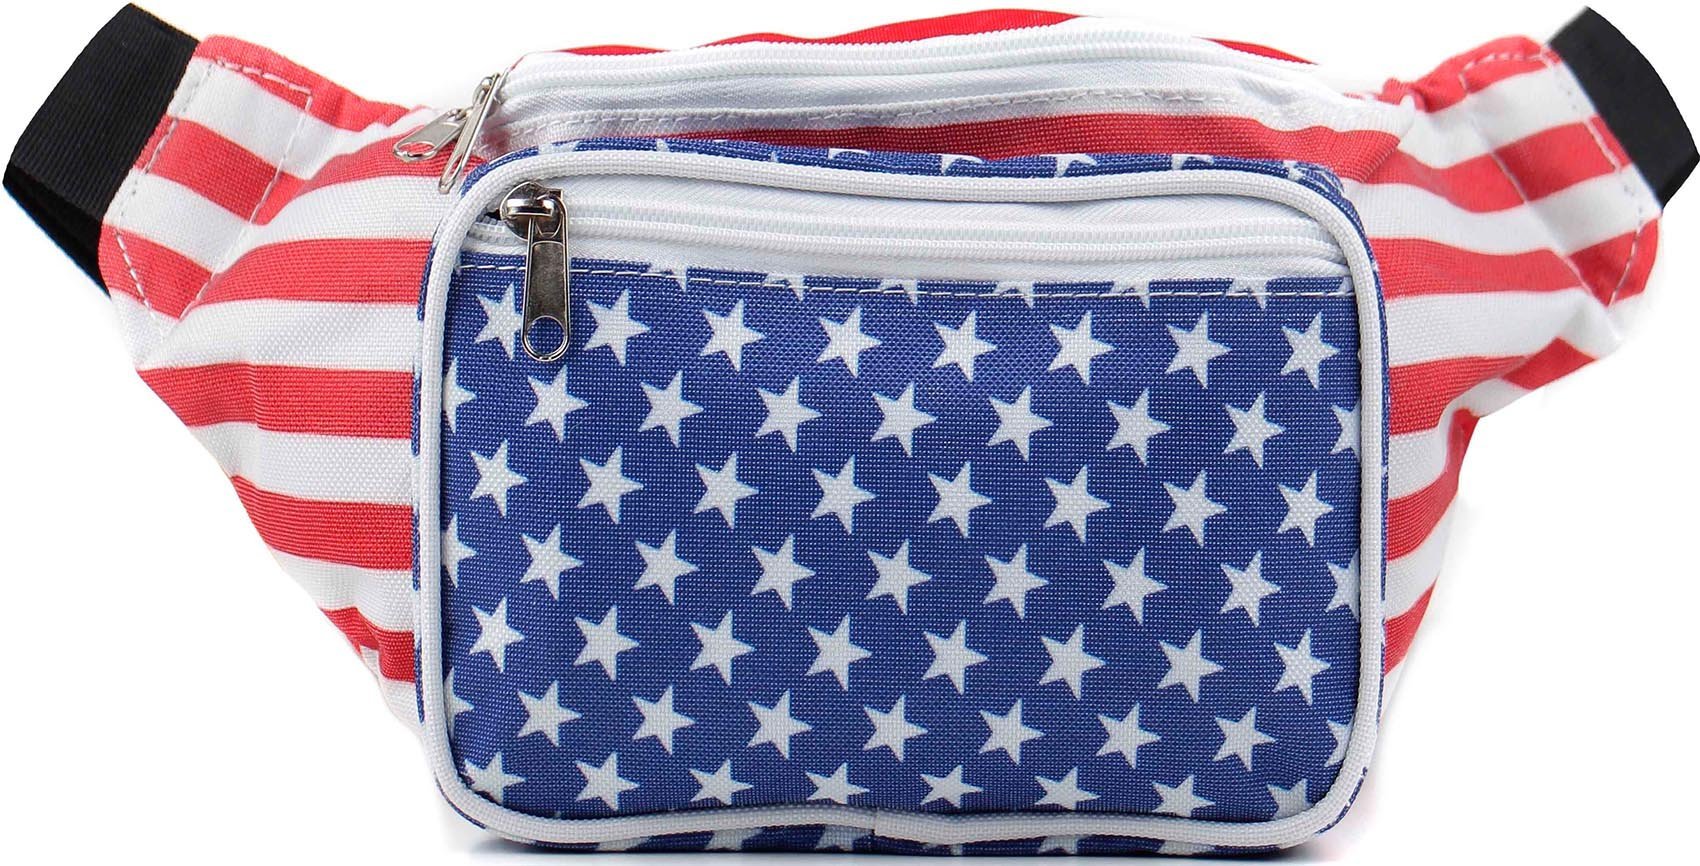 American Flag Fanny Pack I 4th of July Fanny Pack Bum Bag Crossbody - Flag Fanny Pack Waist For Halloween costumes - USA Fanny Pack for 4th of July accessories for women